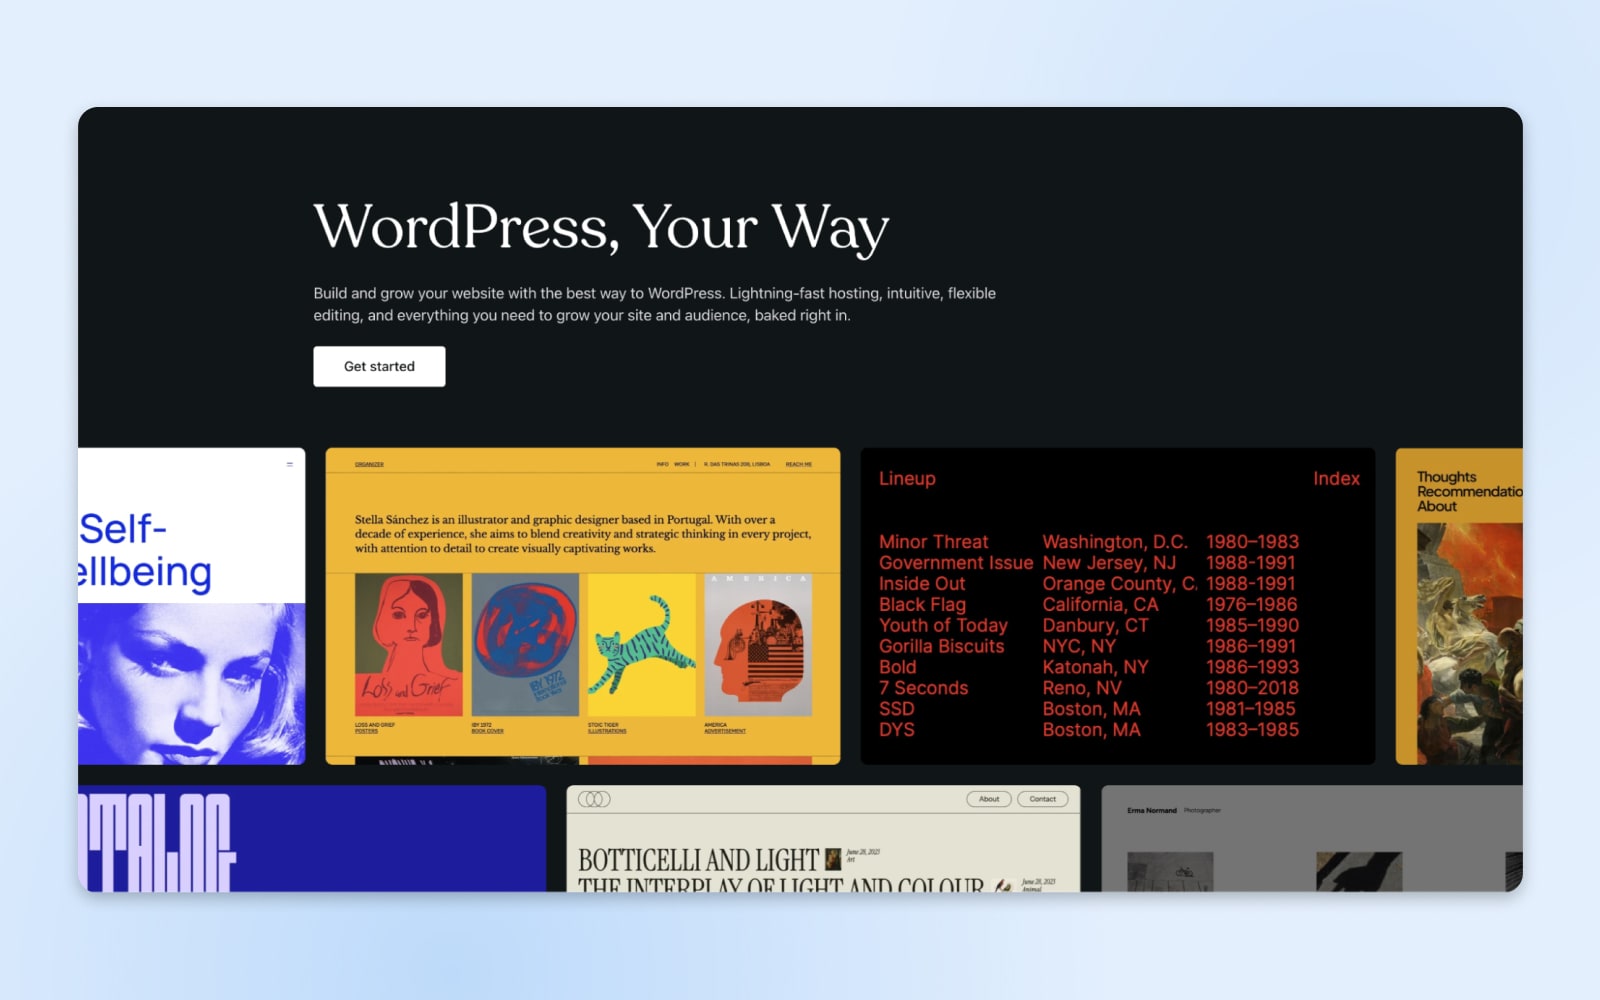 screenshot "WordPress, Your Way:" Build and grow your website with the best way to WordPress. LIghtenting-fast hosting, intuitive, flexible editing, and everything you need to grow your site and audience, baked right in. Get started." 